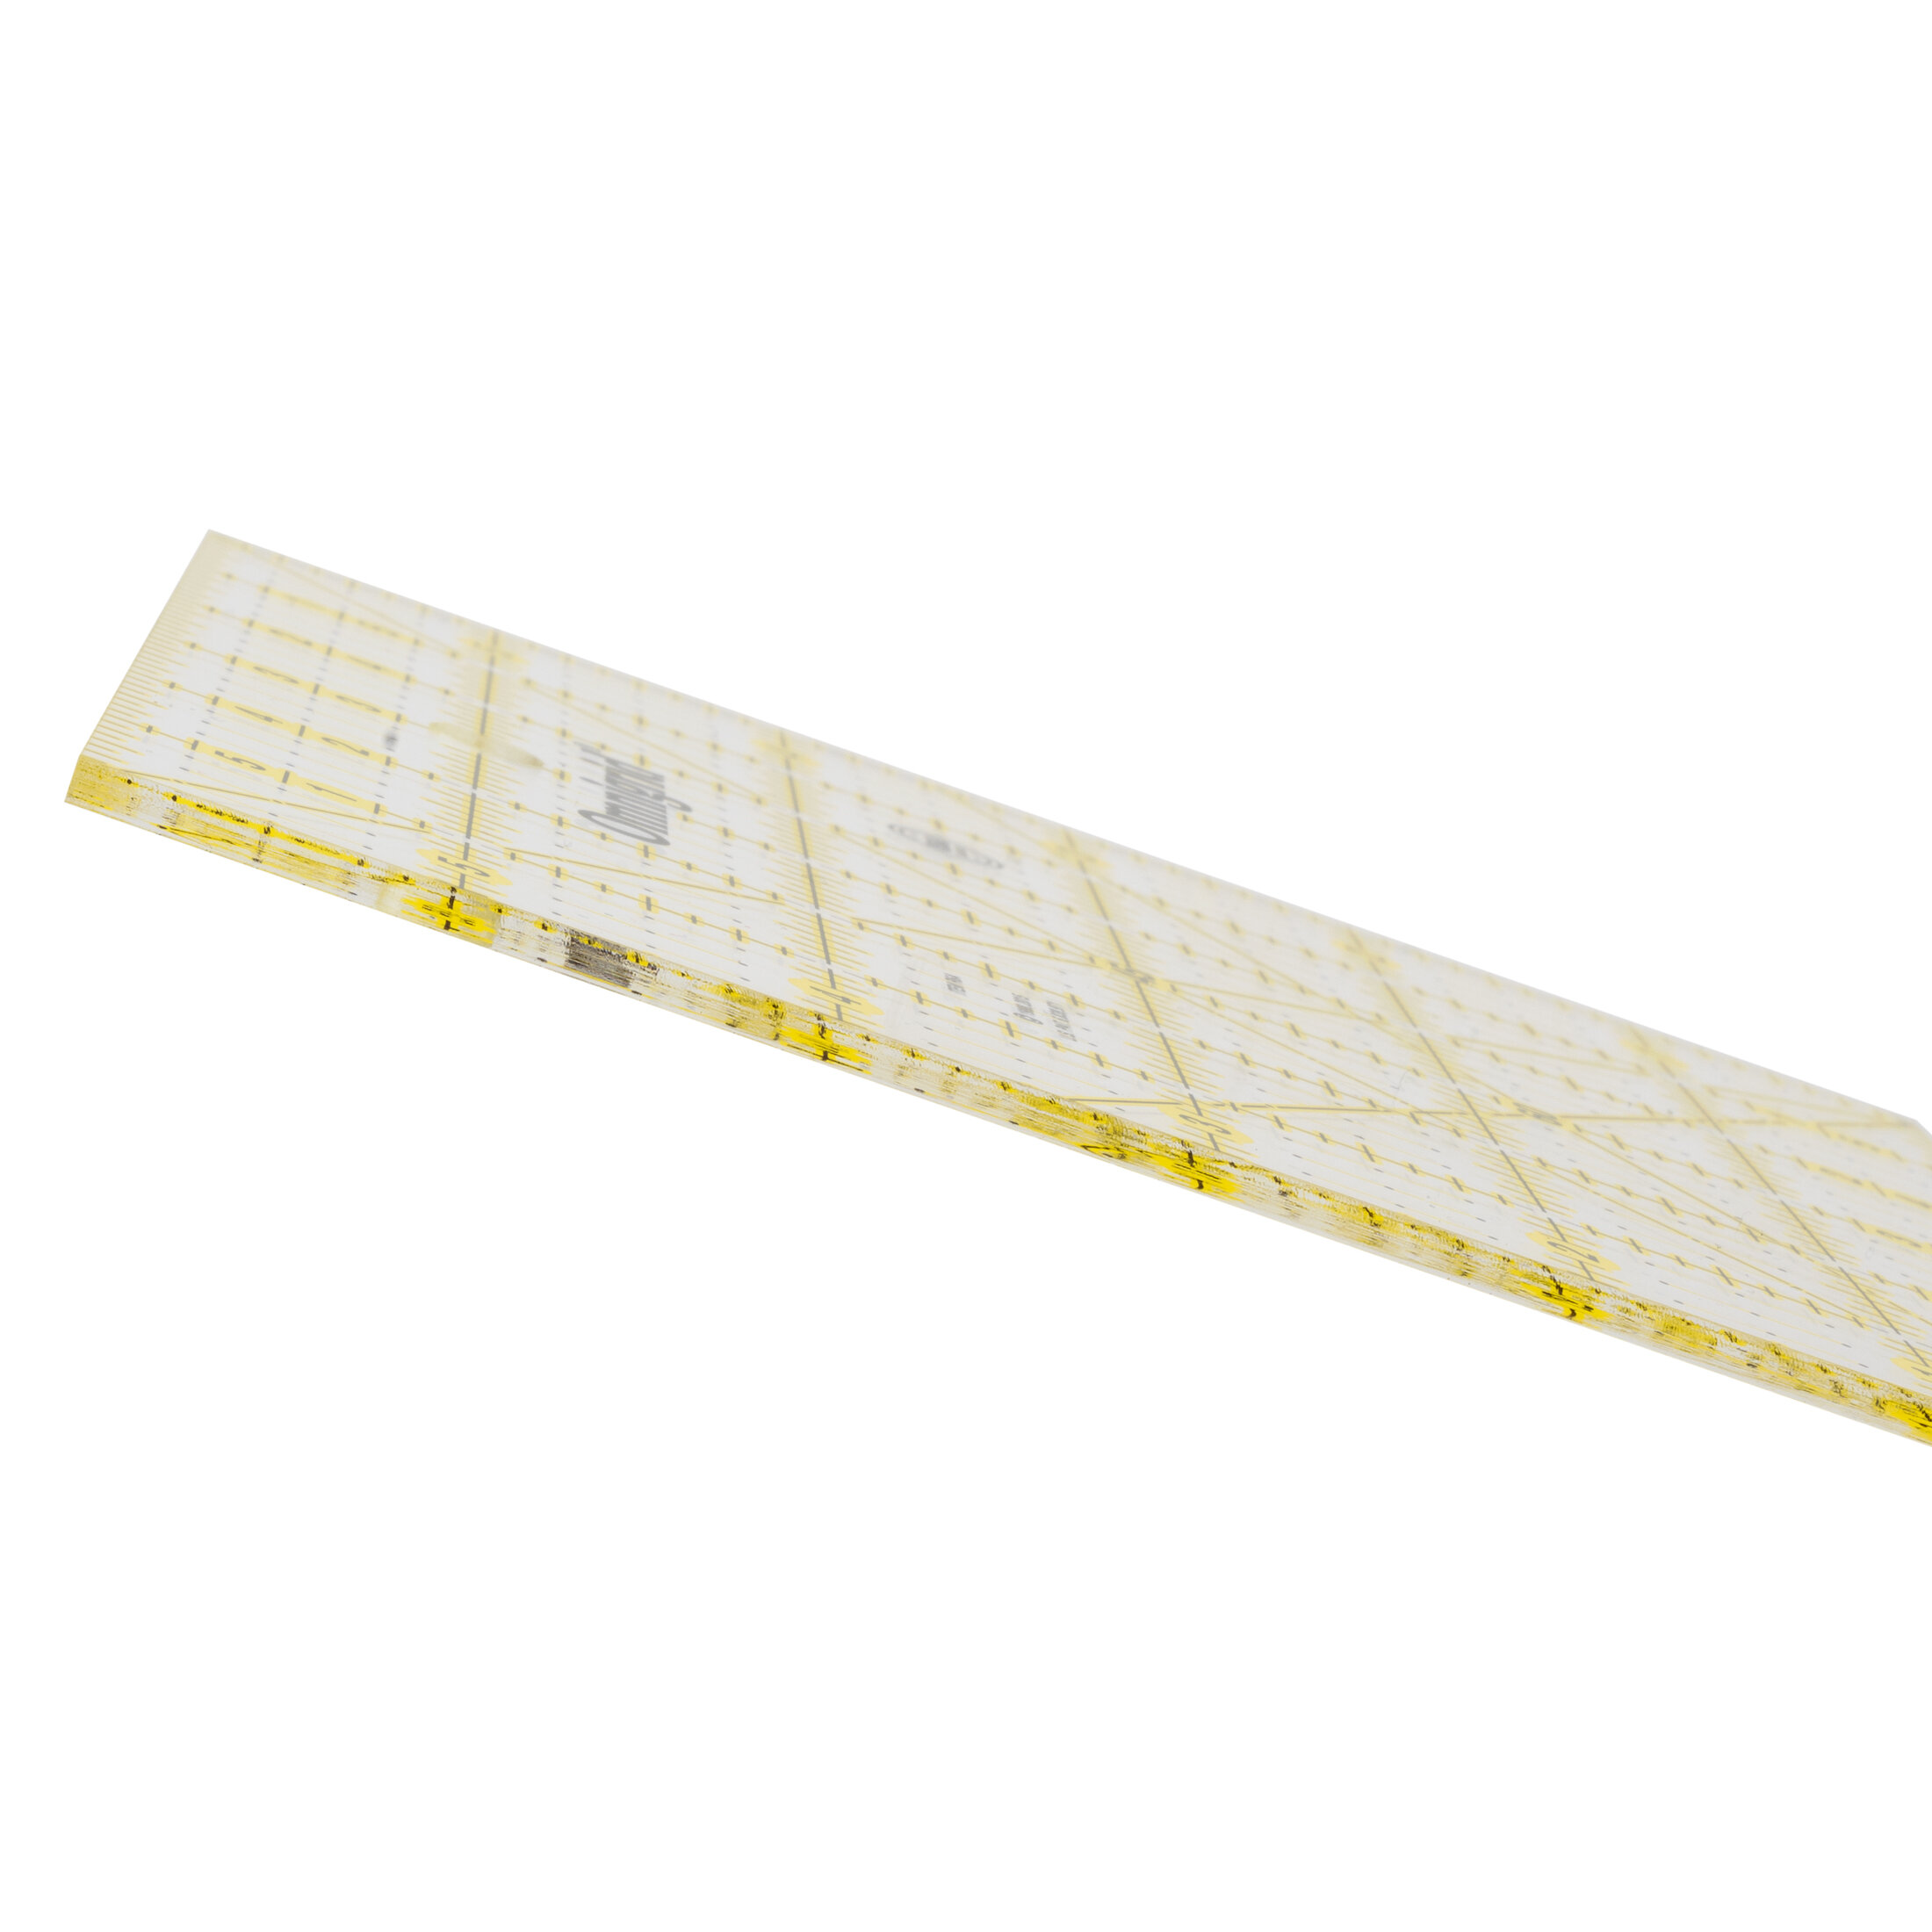 8 Half-Square Triangle Ruler, Omnigrid : Sewing Parts Online